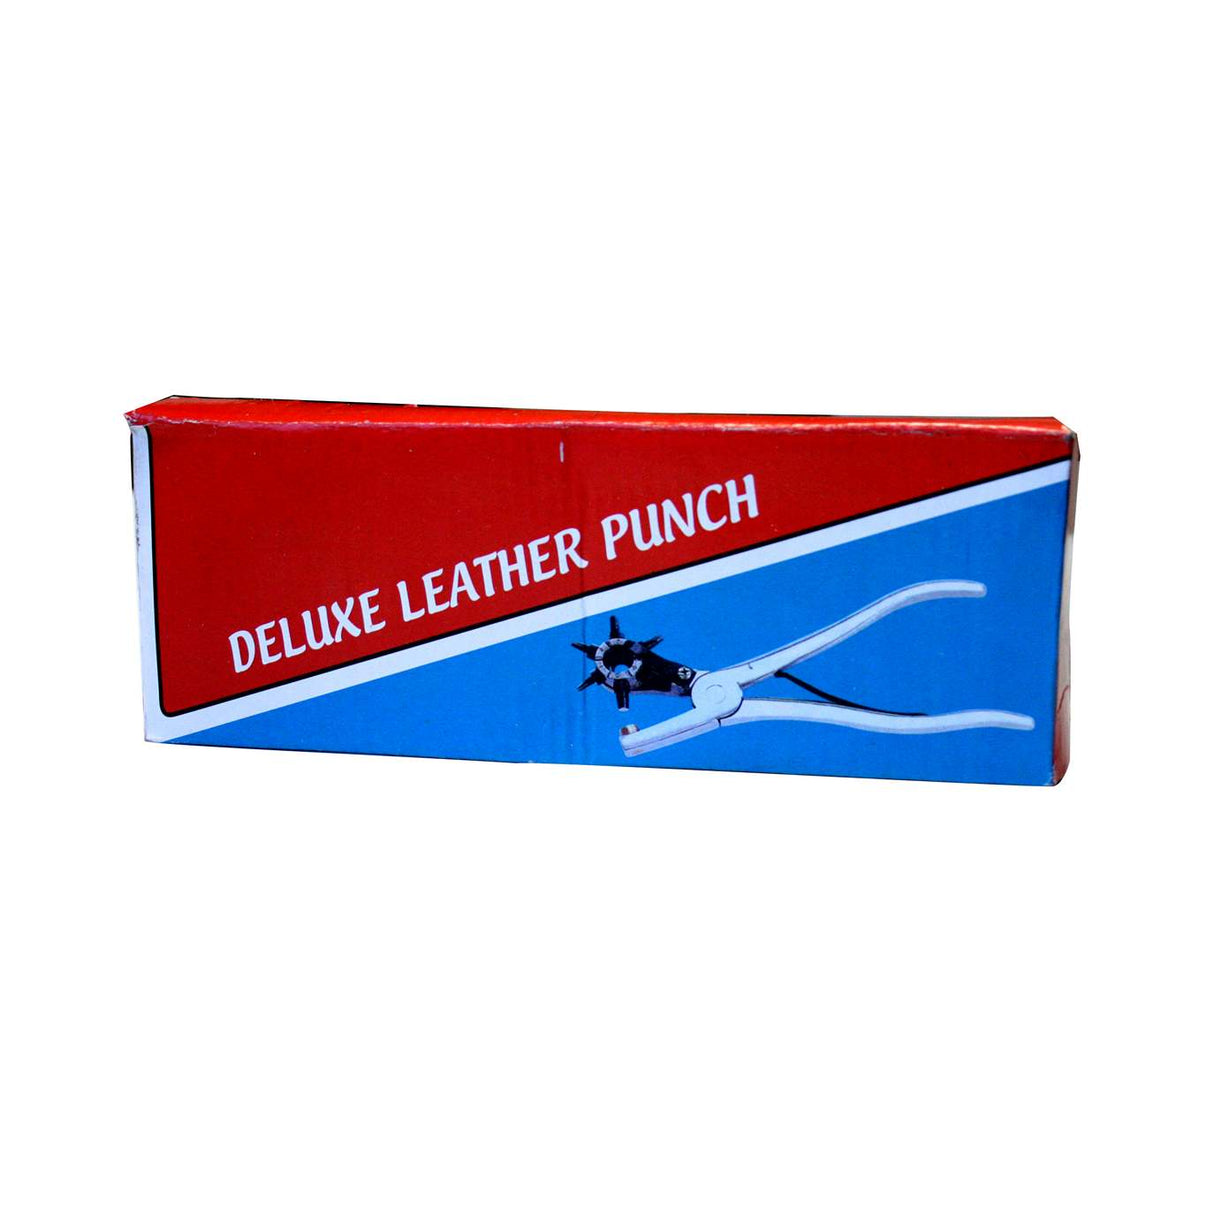 Revolving Leather Punch